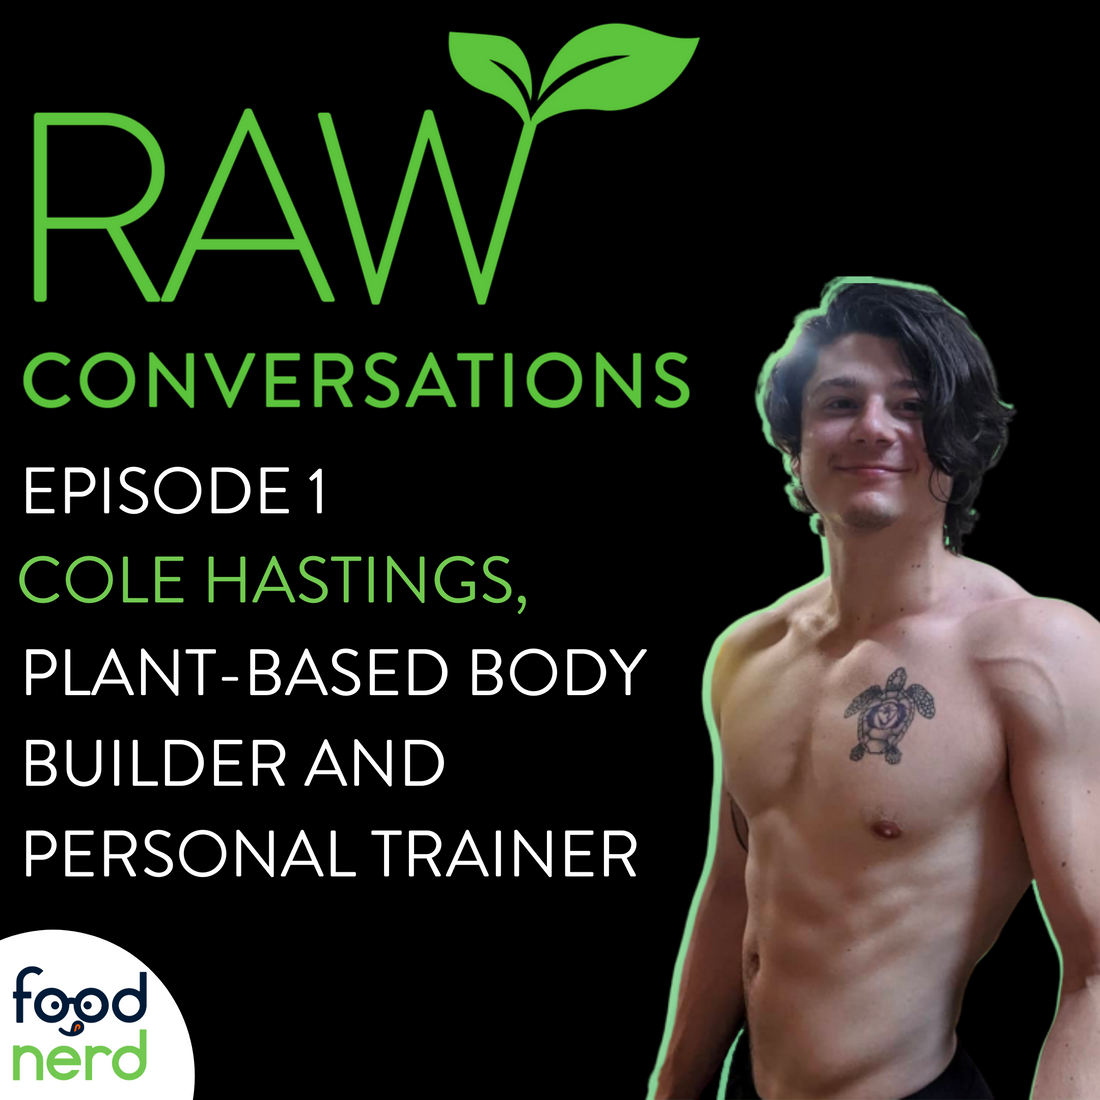 RAW Conversations: Episode 1 - Tips From Plant-Based Body Builder & Personal Trainer Cole Hastings